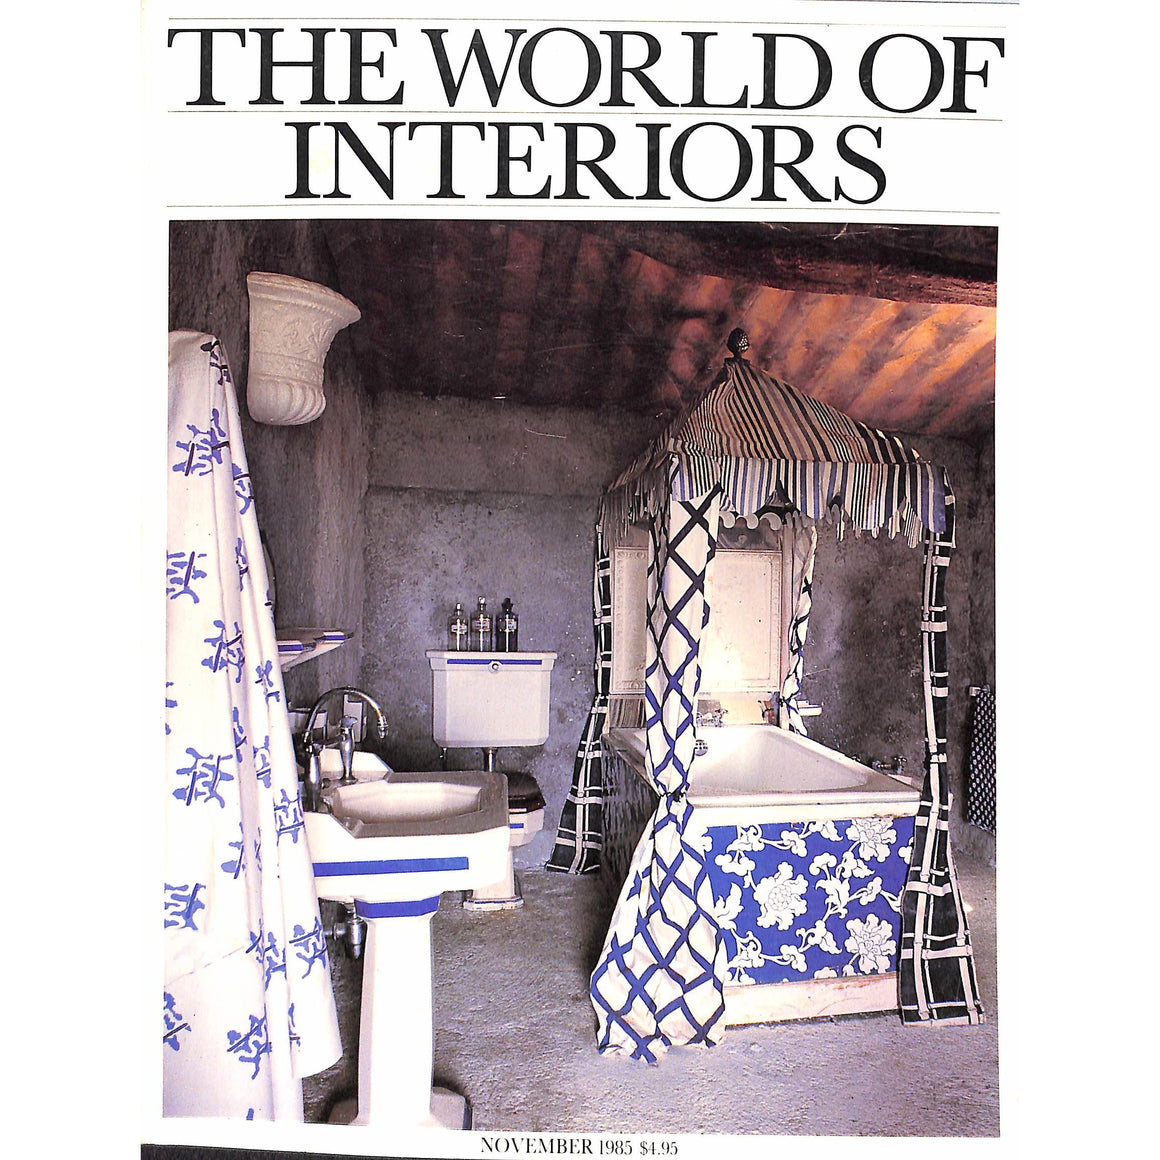 "The World of Interiors" November 1985 (SOLD)